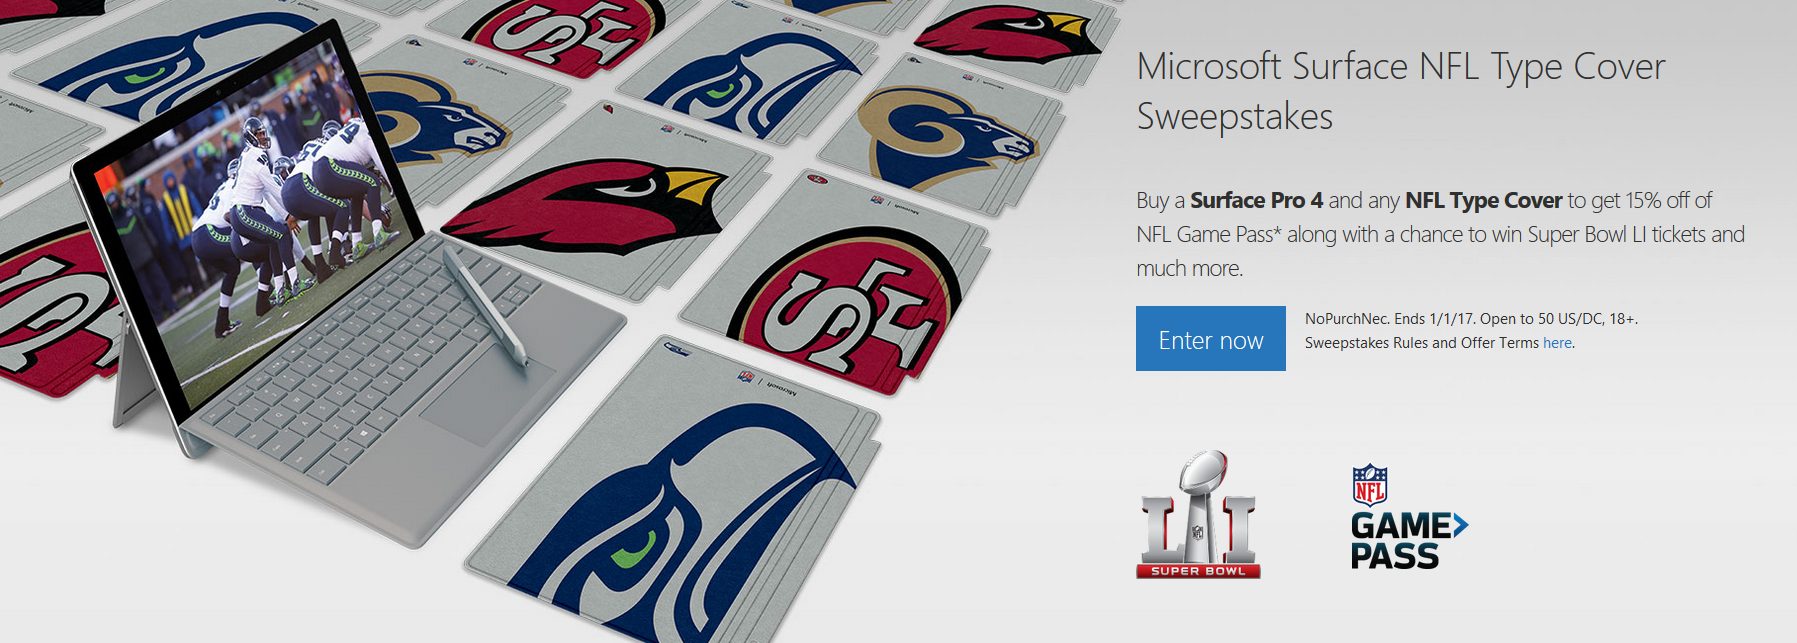 Buy a Surface Pro 4 and a NFL Type Cover, and take 15% off NFL Game Pass - Buy a Surface Pro 4 and an NFL Type Cover and take 15% off NFL Game Pass; win two Super Bowl tickets